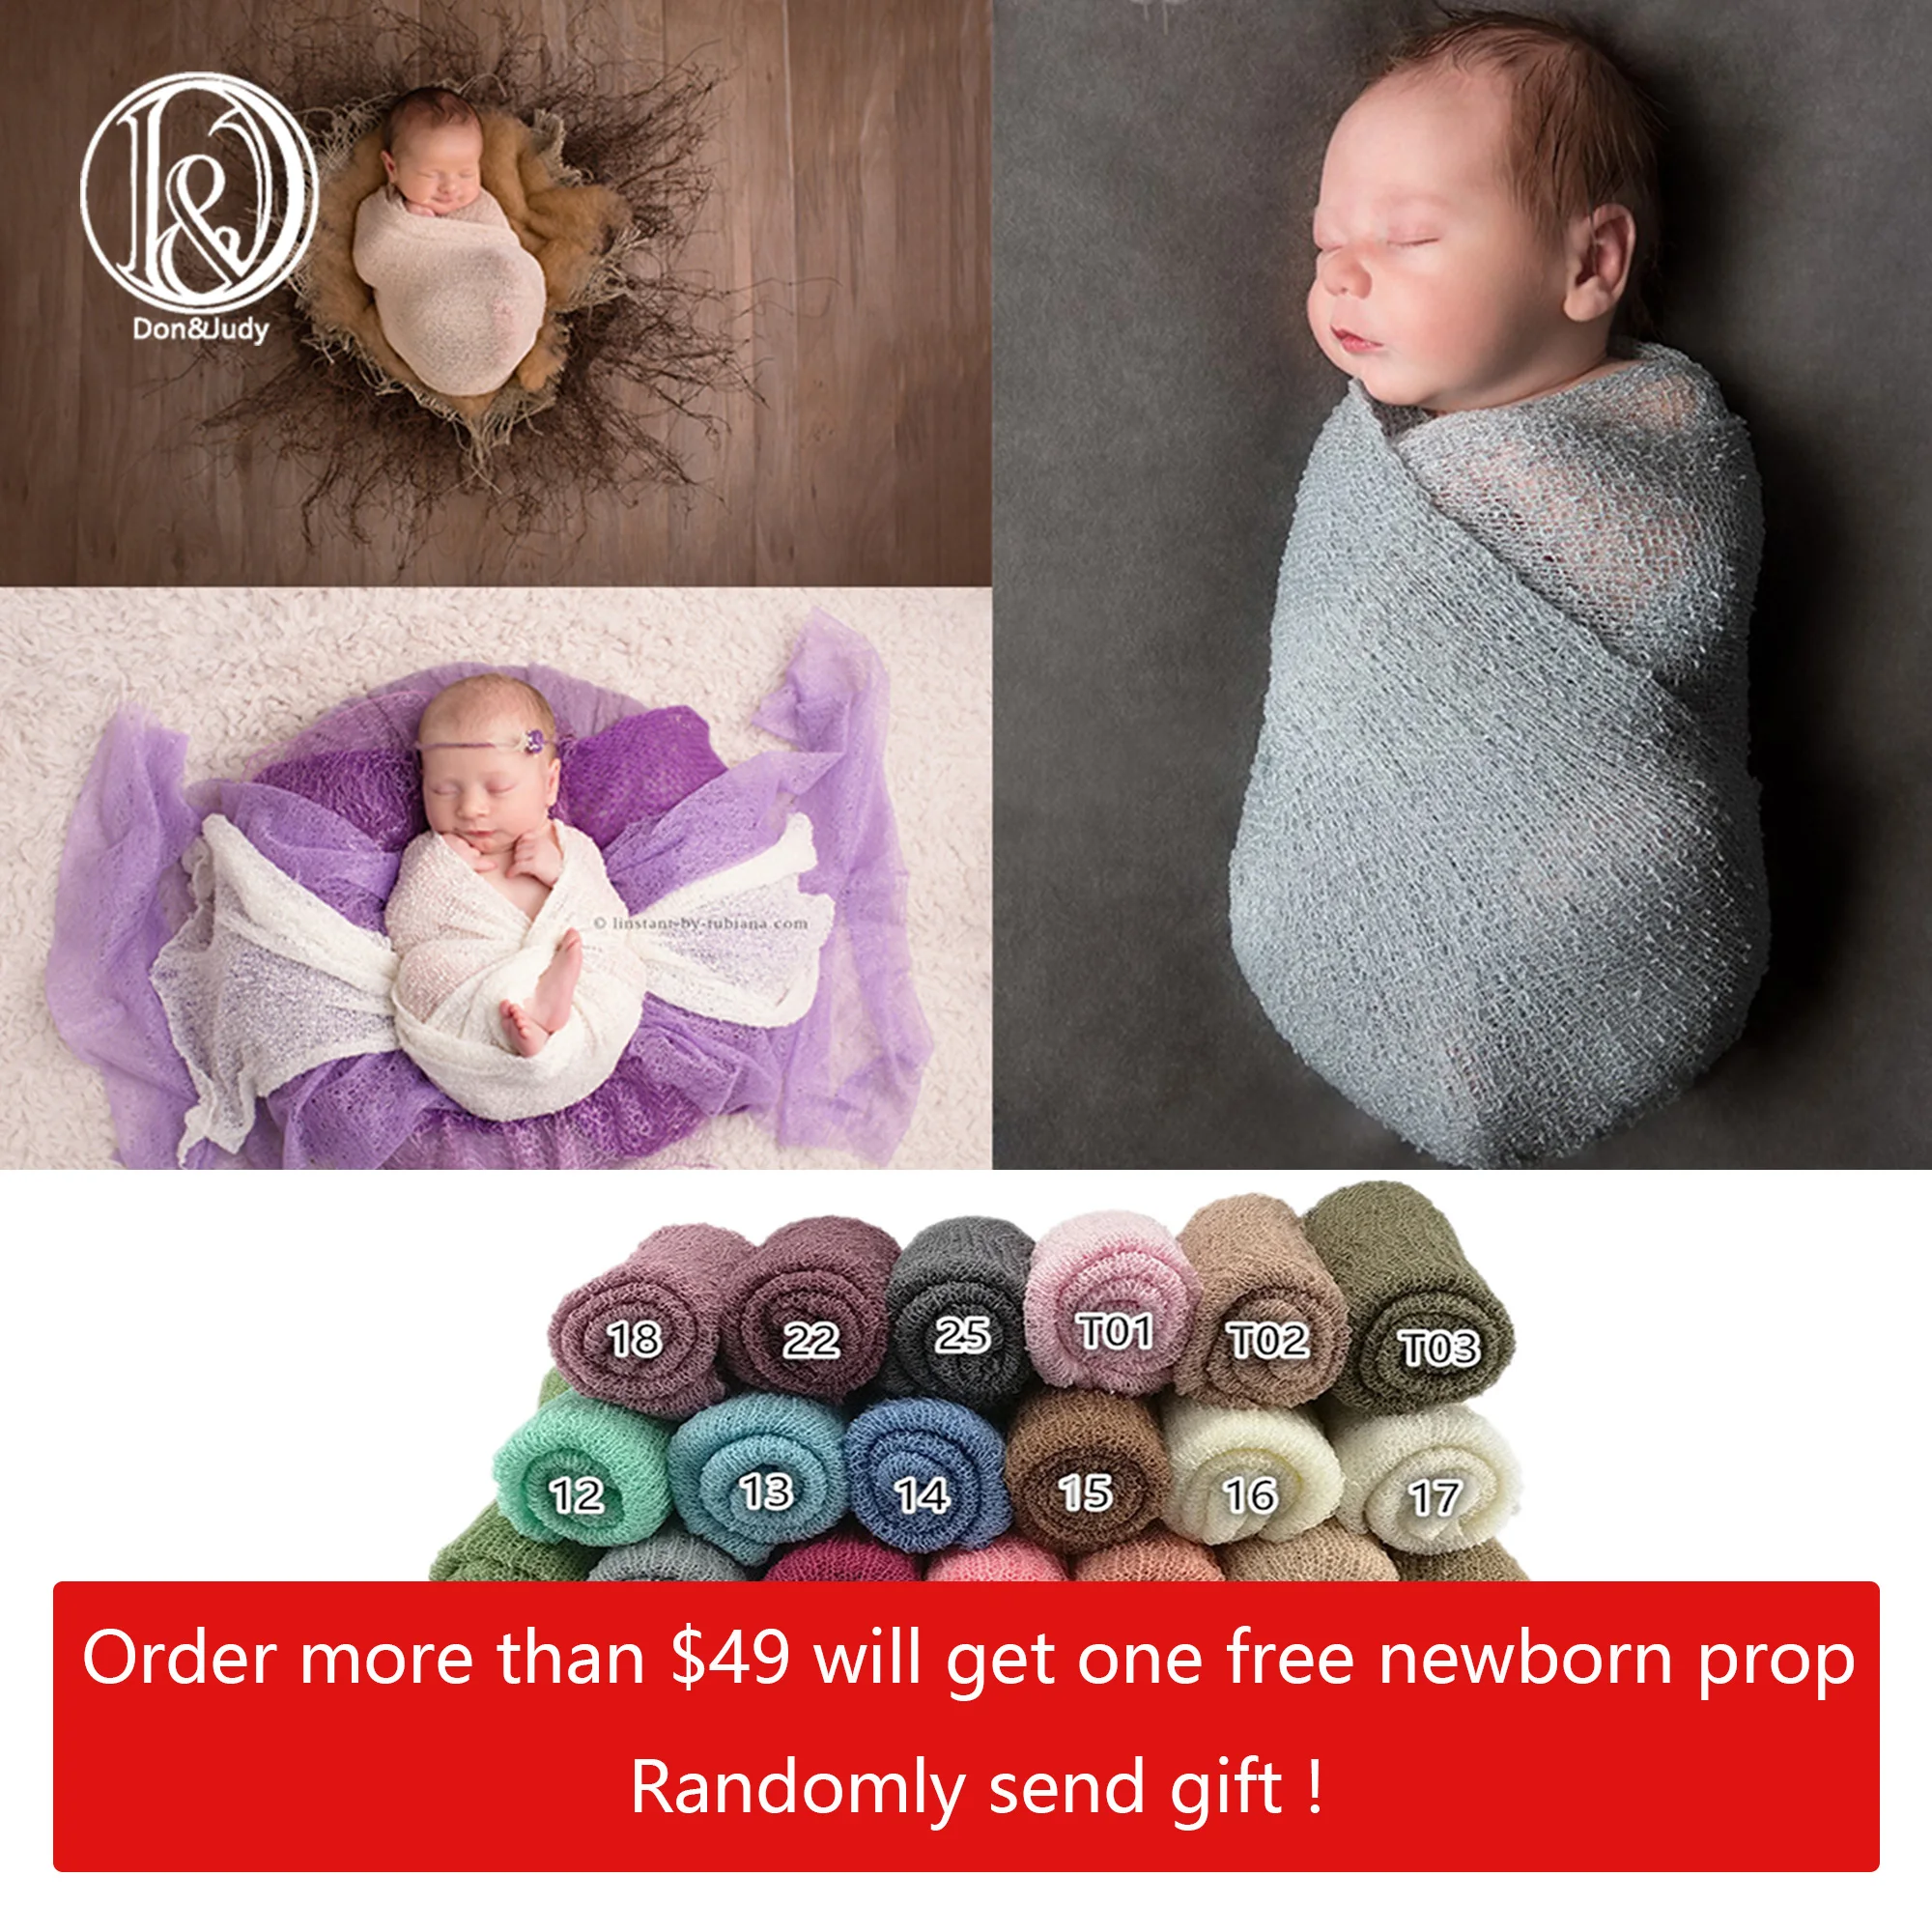 Soft Knit Stretchy Wraps Swaddle For Newborn Baby Photography Props Kids Receiving Blankets Cloth Accessories For Photo Shooting 2 pcs set newborn photography props blanket baby blanket wraps stretch knit swaddle wrap baby photo shooting cloth accessories